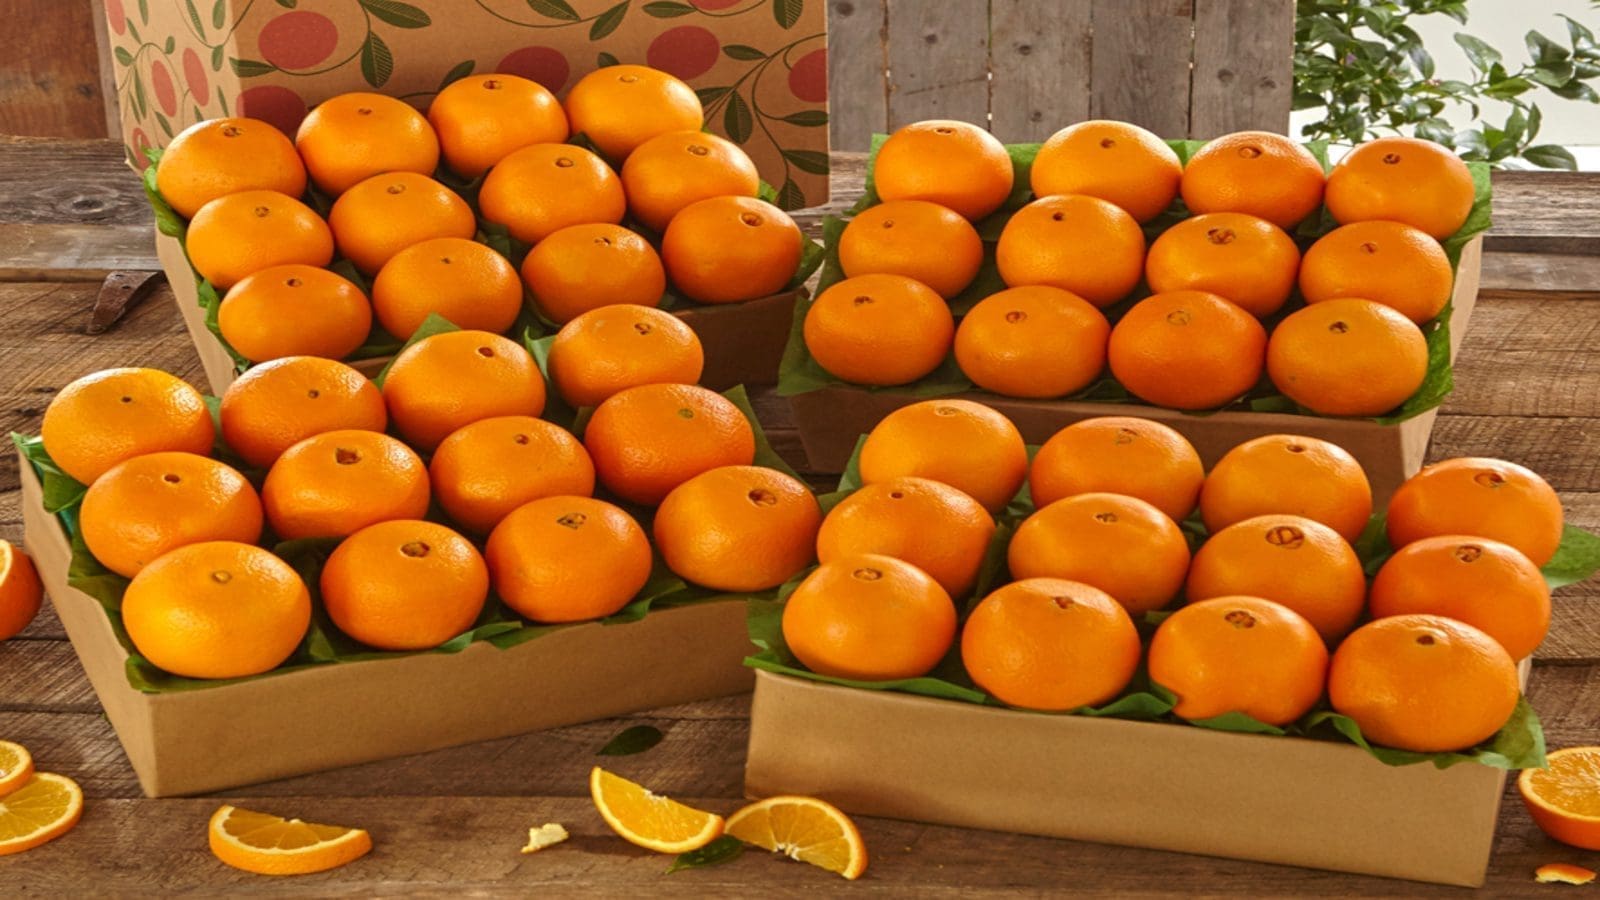 EFSA recognizes need for South African citrus imports to undergo cold treatment